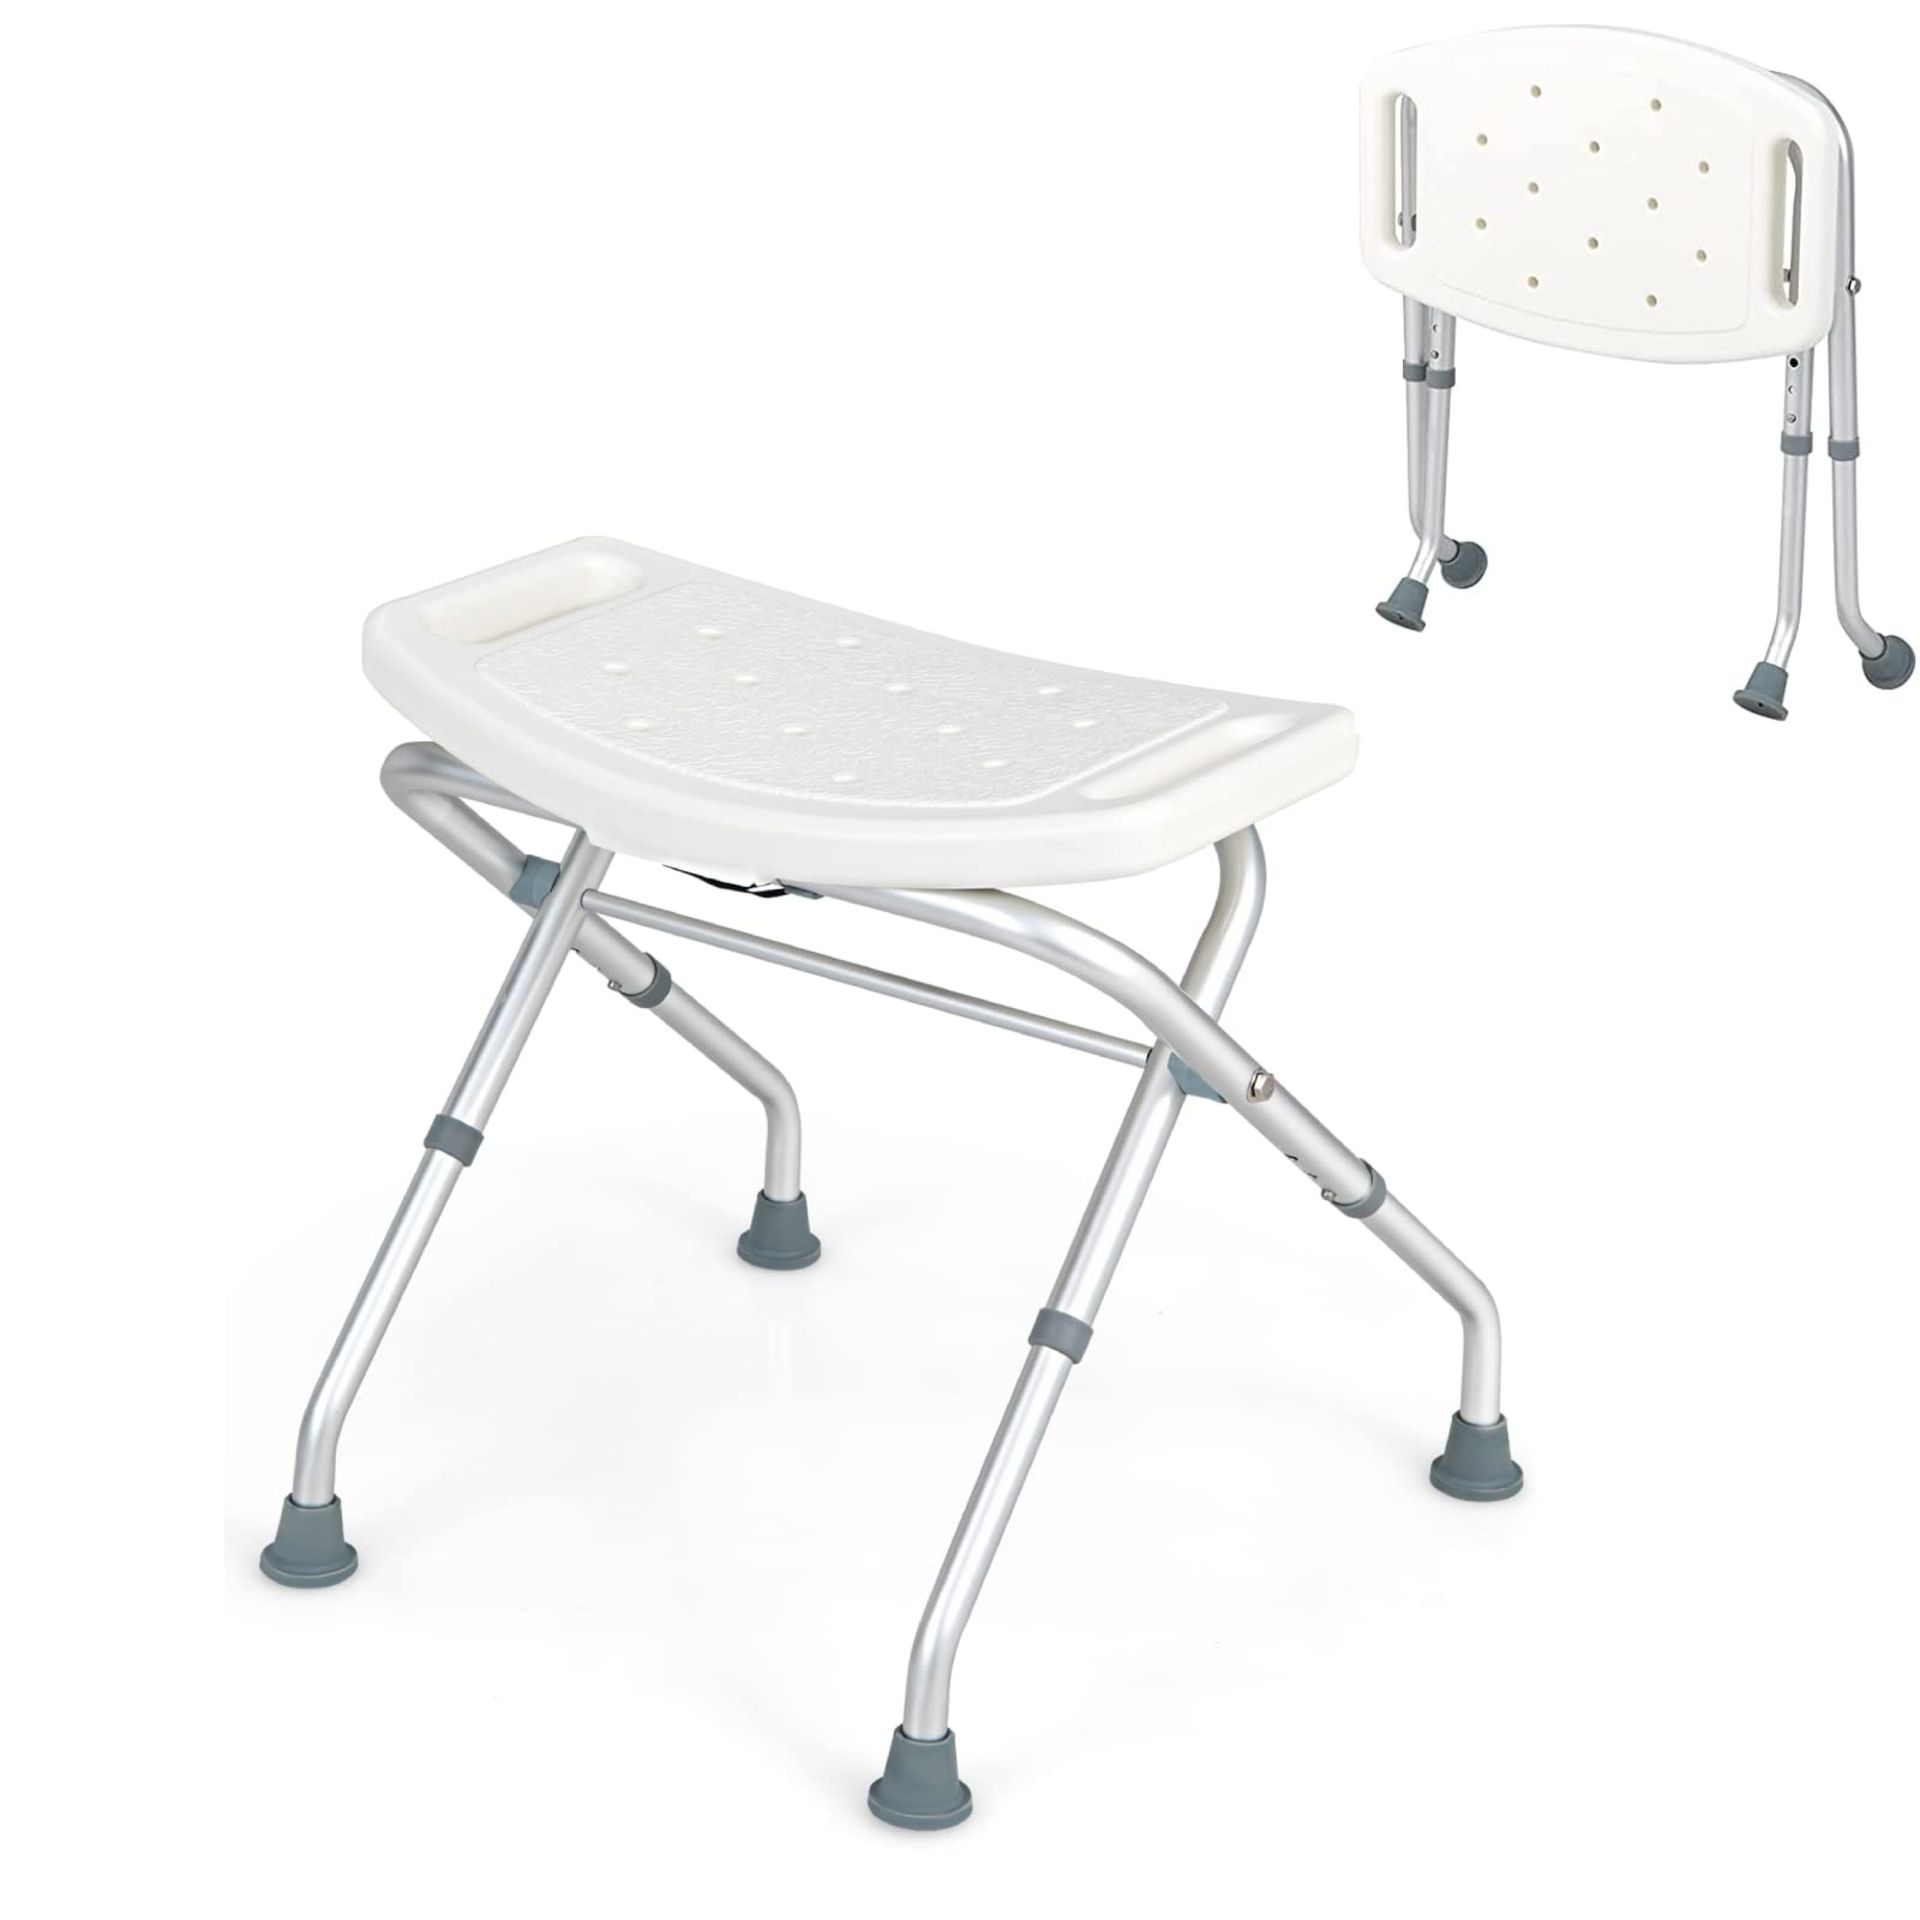 Folding Shower Stool, 3-Level Height Adjustable Bath Chair with Handles - ER53